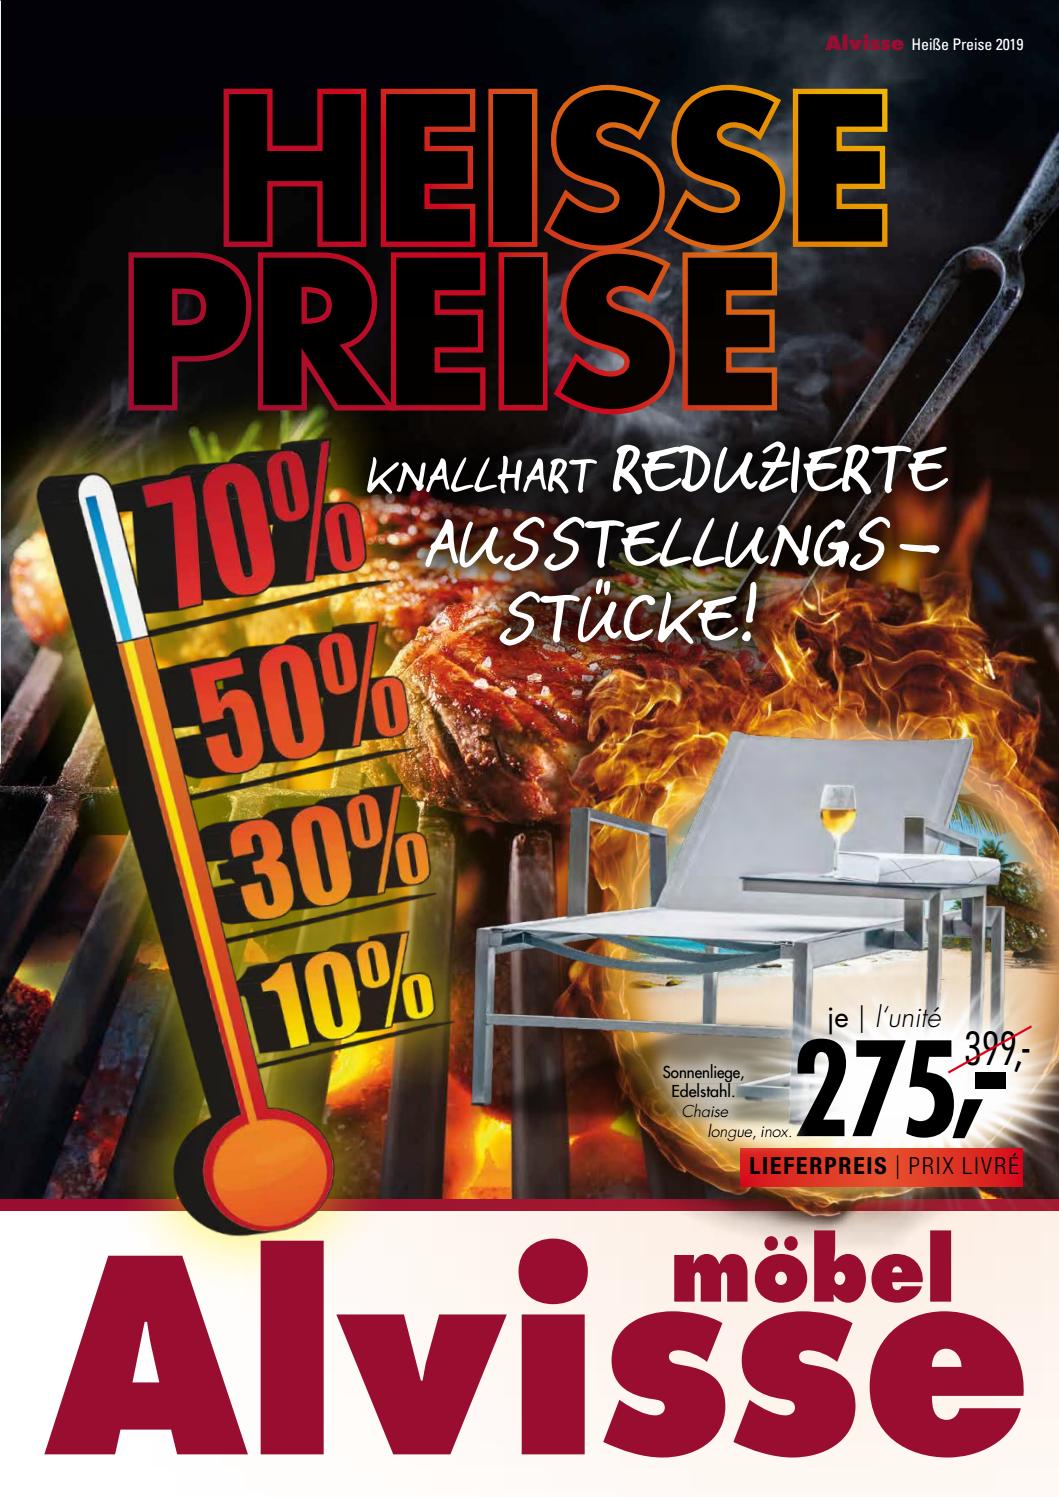 Ensemble Table Ronde Et Chaise Best Of Heisse Preise by Ip Luxembourg issuu